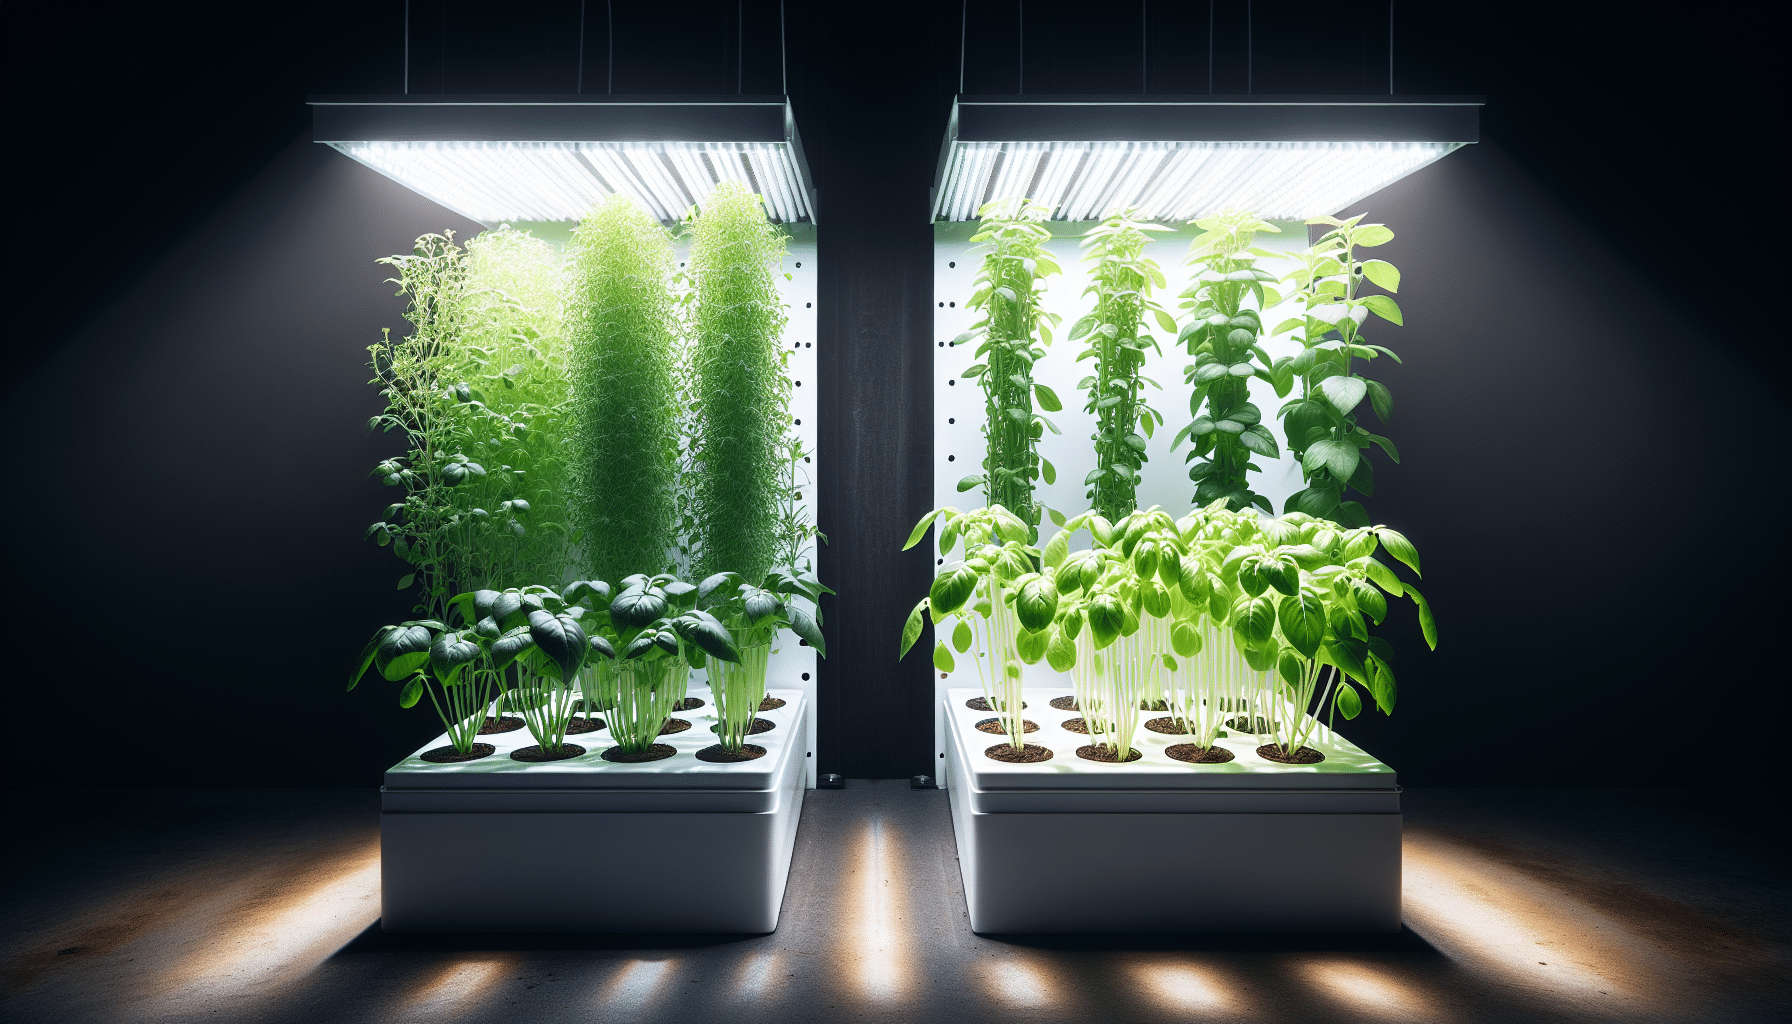 Addressing insufficient light in hydroponic systems